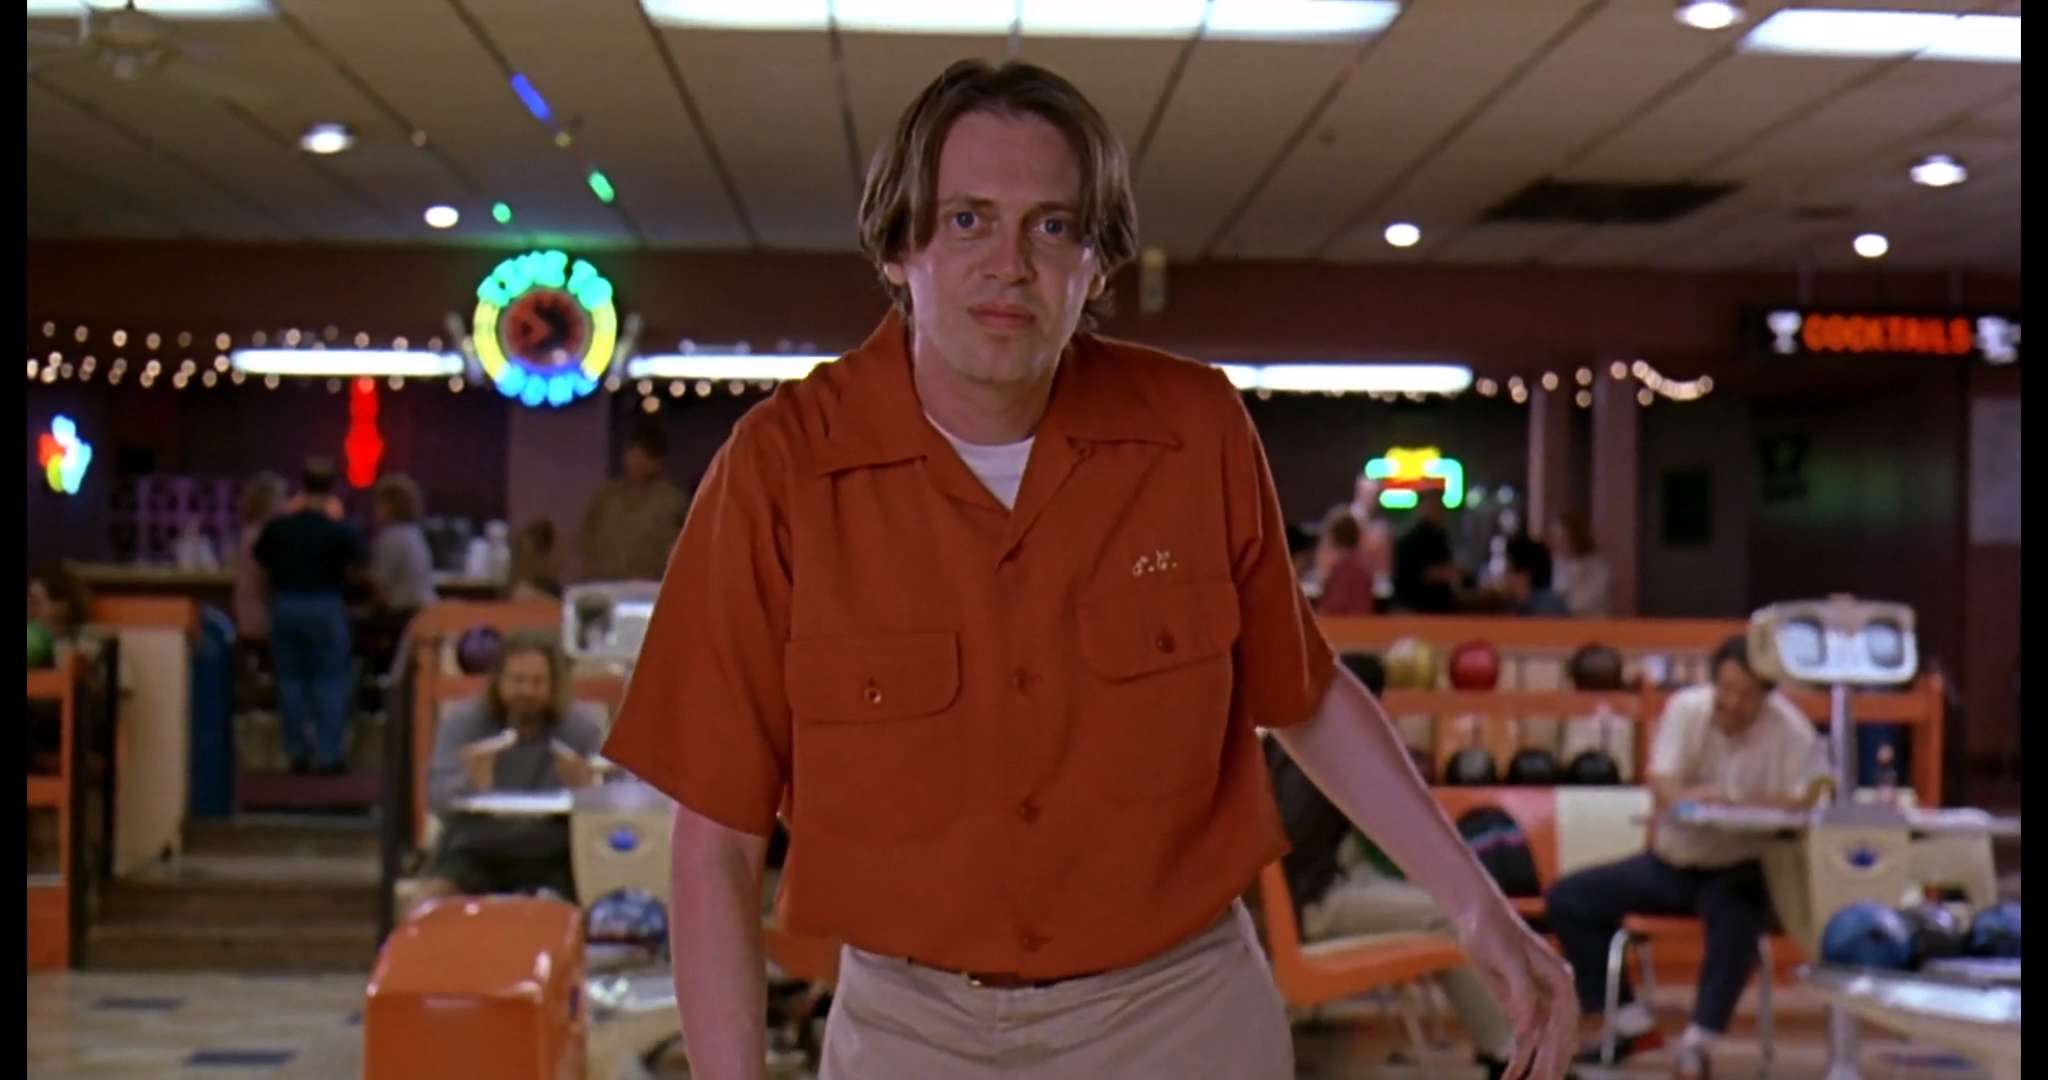 image for The Big Lebowski (1998) When Donnie bowls in the scene before he has his heart attack he does not hit a strike and proceeds to examine his arm, a symptom of an impending heart attack is discomfort in 